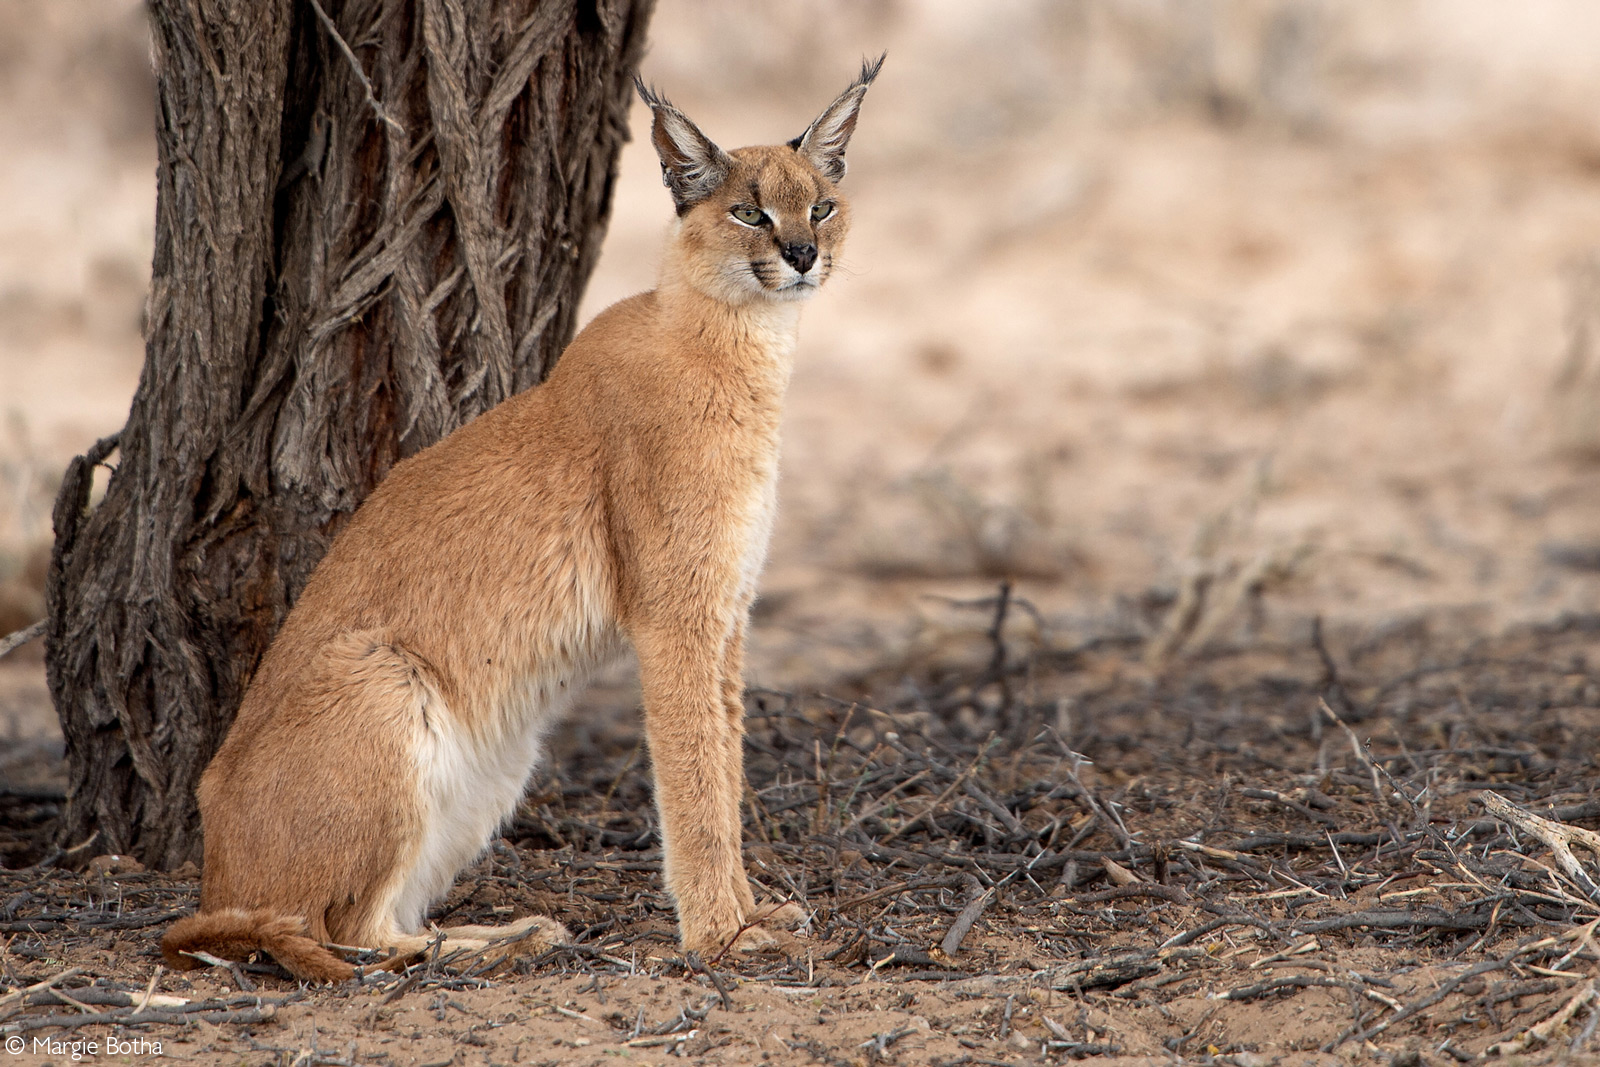 A caracal spotted by the Rooiputs waterhole. Kgalagadi Transfrontier Park, South Africa © Margie Botha